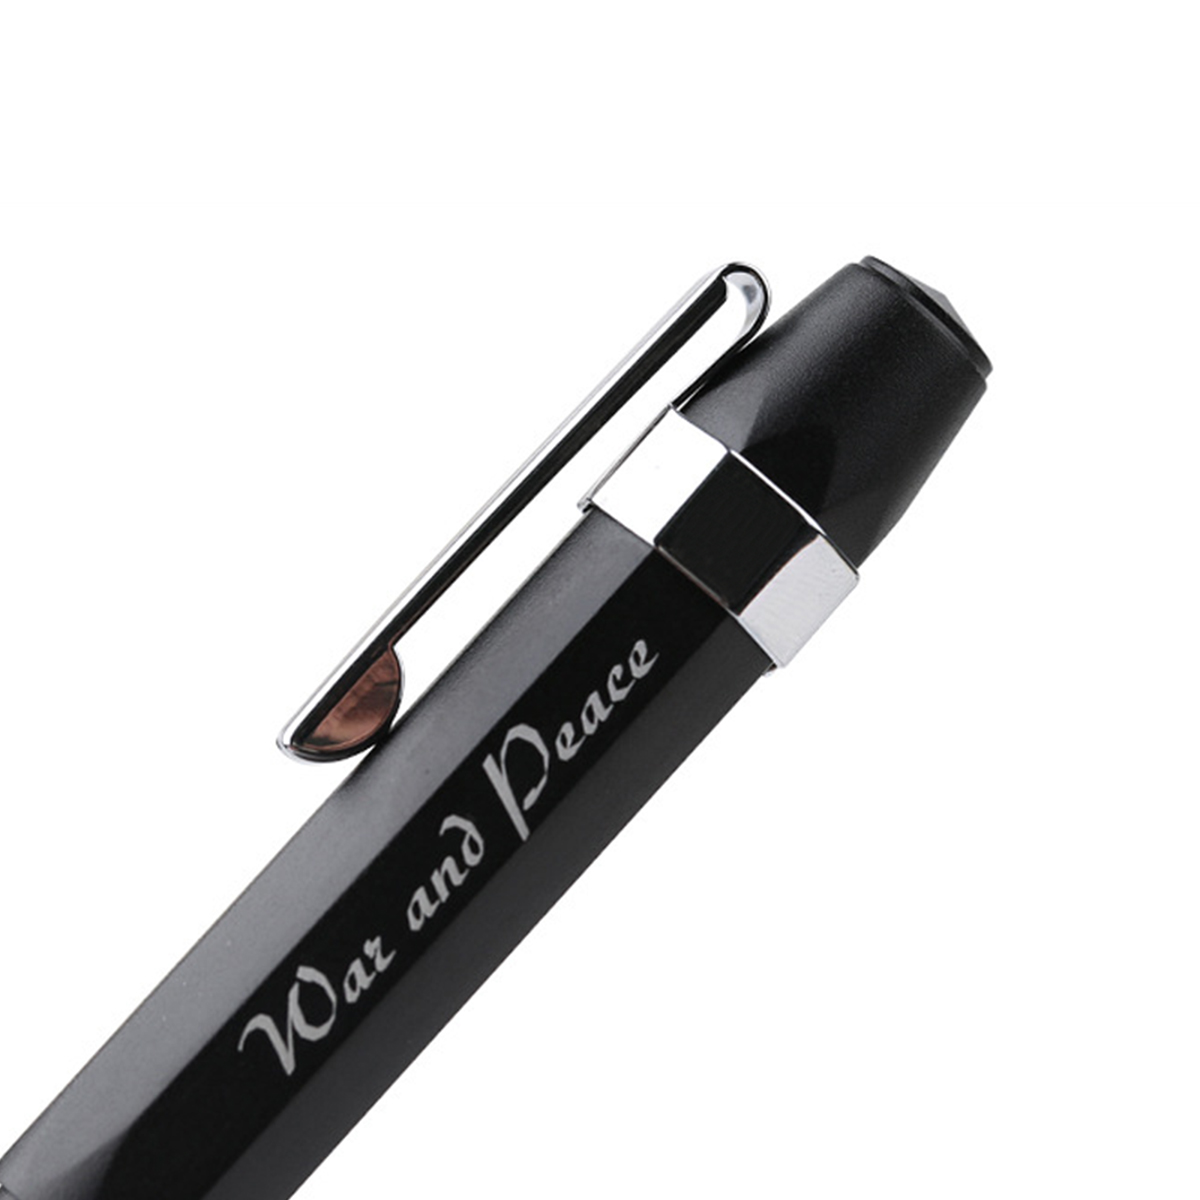 Metal-Fountain-Pen-Short-Smooth-Calligraphy-Writing-Pen-Ink-Gel-Pen-with-Iron-Case-Gift-for-Students-1755553-7